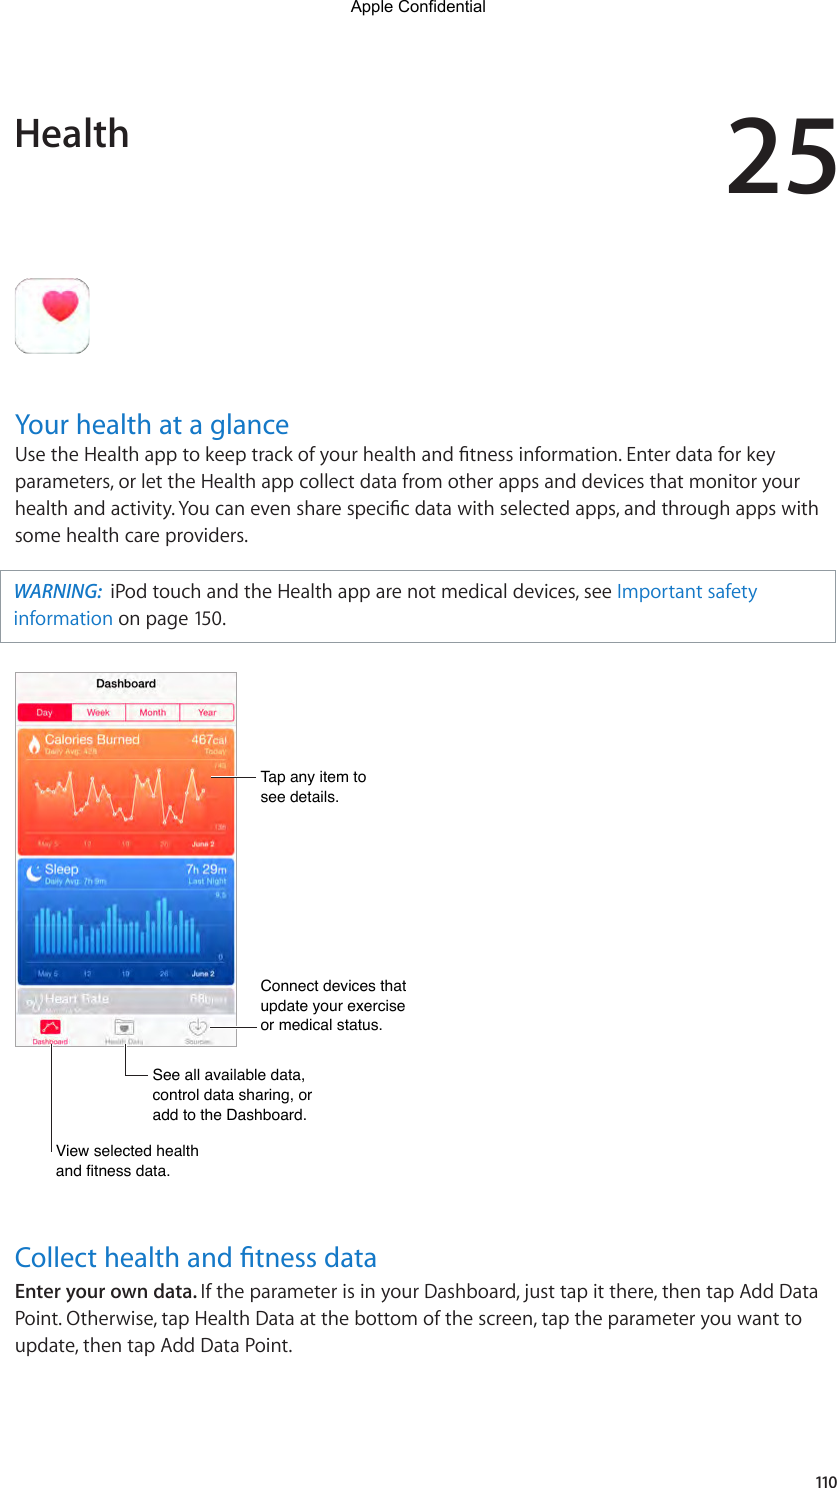 25110Your health at a glanceUsetheHealthapptokeeptrackofyourhealthandtnessinformation.Enterdataforkeyparameters, or let the Health app collect data from other apps and devices that monitor your healthandactivity.Youcanevensharespecicdatawithselectedapps,andthroughappswithsome health care providers.WARNING:  iPod touch and the Health app are not medical devices, see Important safety information on page 150.Tap any item to see details.Tap any item to see details.See all available data, control data sharing, or add to the Dashboard.See all available data, control data sharing, or add to the Dashboard.View selected health and fitness data.View selected health and fitness data.Connect devices that update your exercise or medical status.Connect devices that update your exercise or medical status.Collect health and tness dataEnter your own data. If the parameter is in your Dashboard, just tap it there, then tap Add Data Point. Otherwise, tap Health Data at the bottom of the screen, tap the parameter you want to update, then tap Add Data Point.HealthApple Confidential